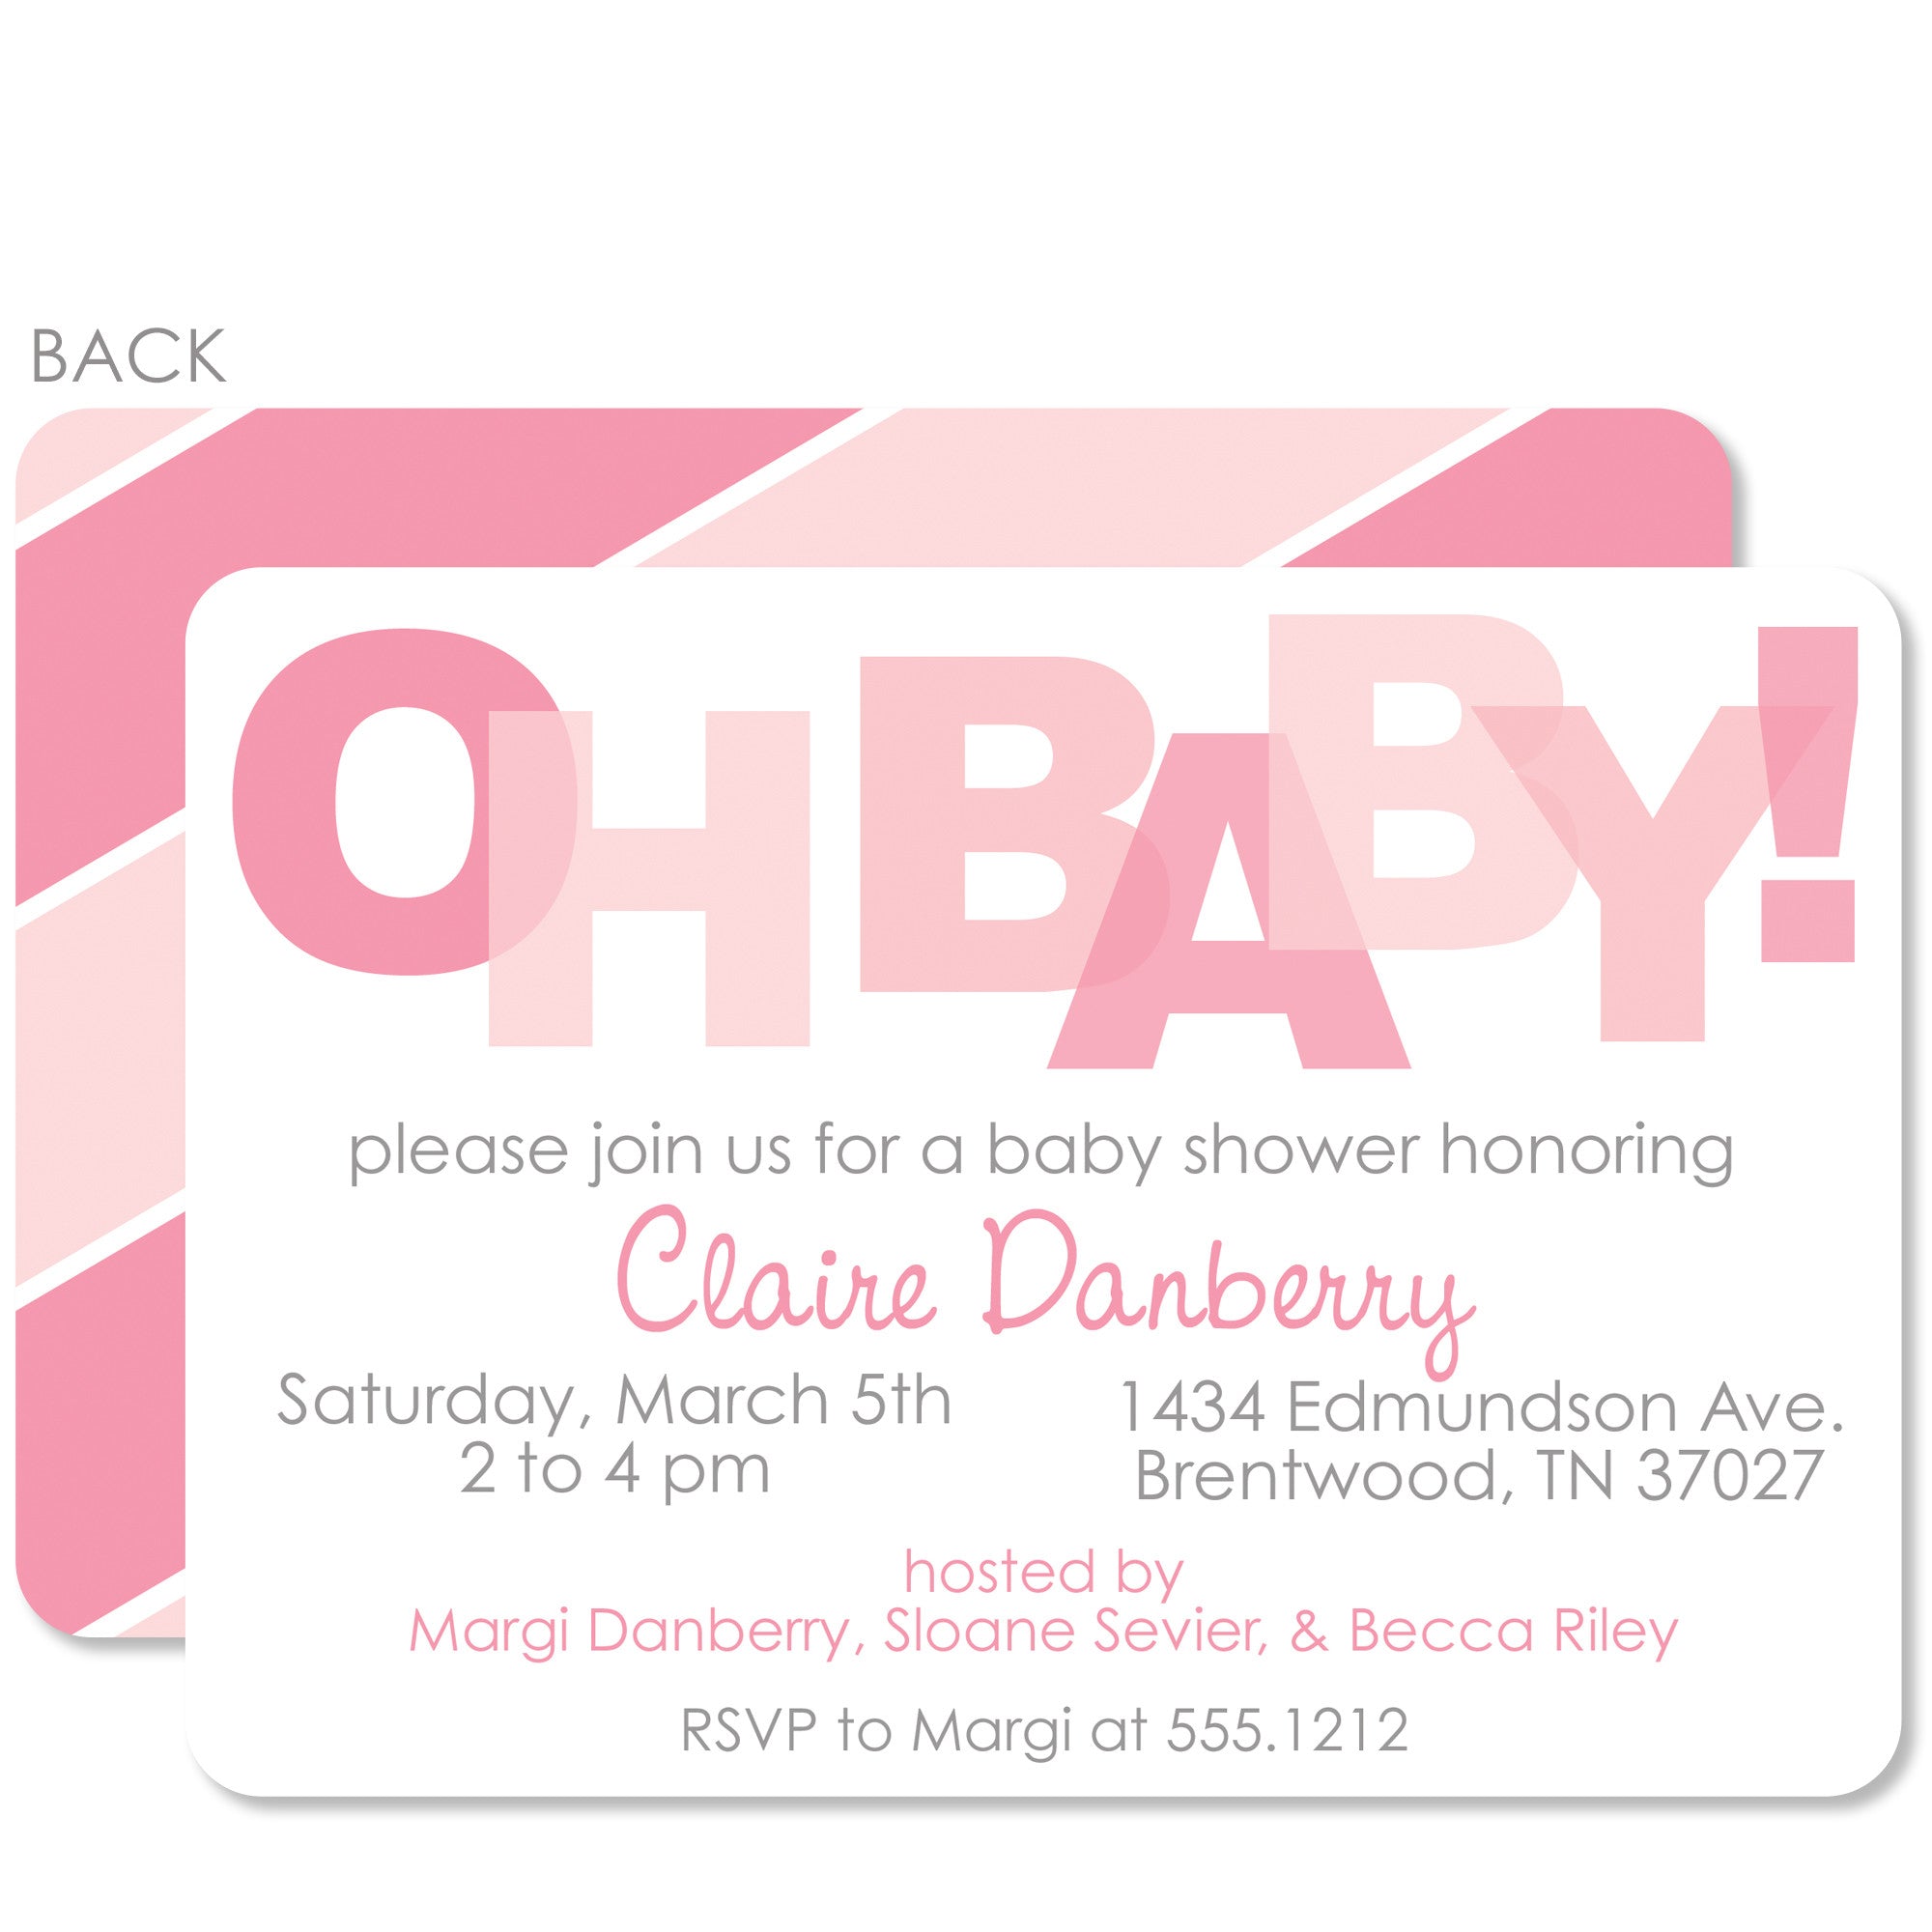 Oh Baby! Pink Baby Shower Invitation